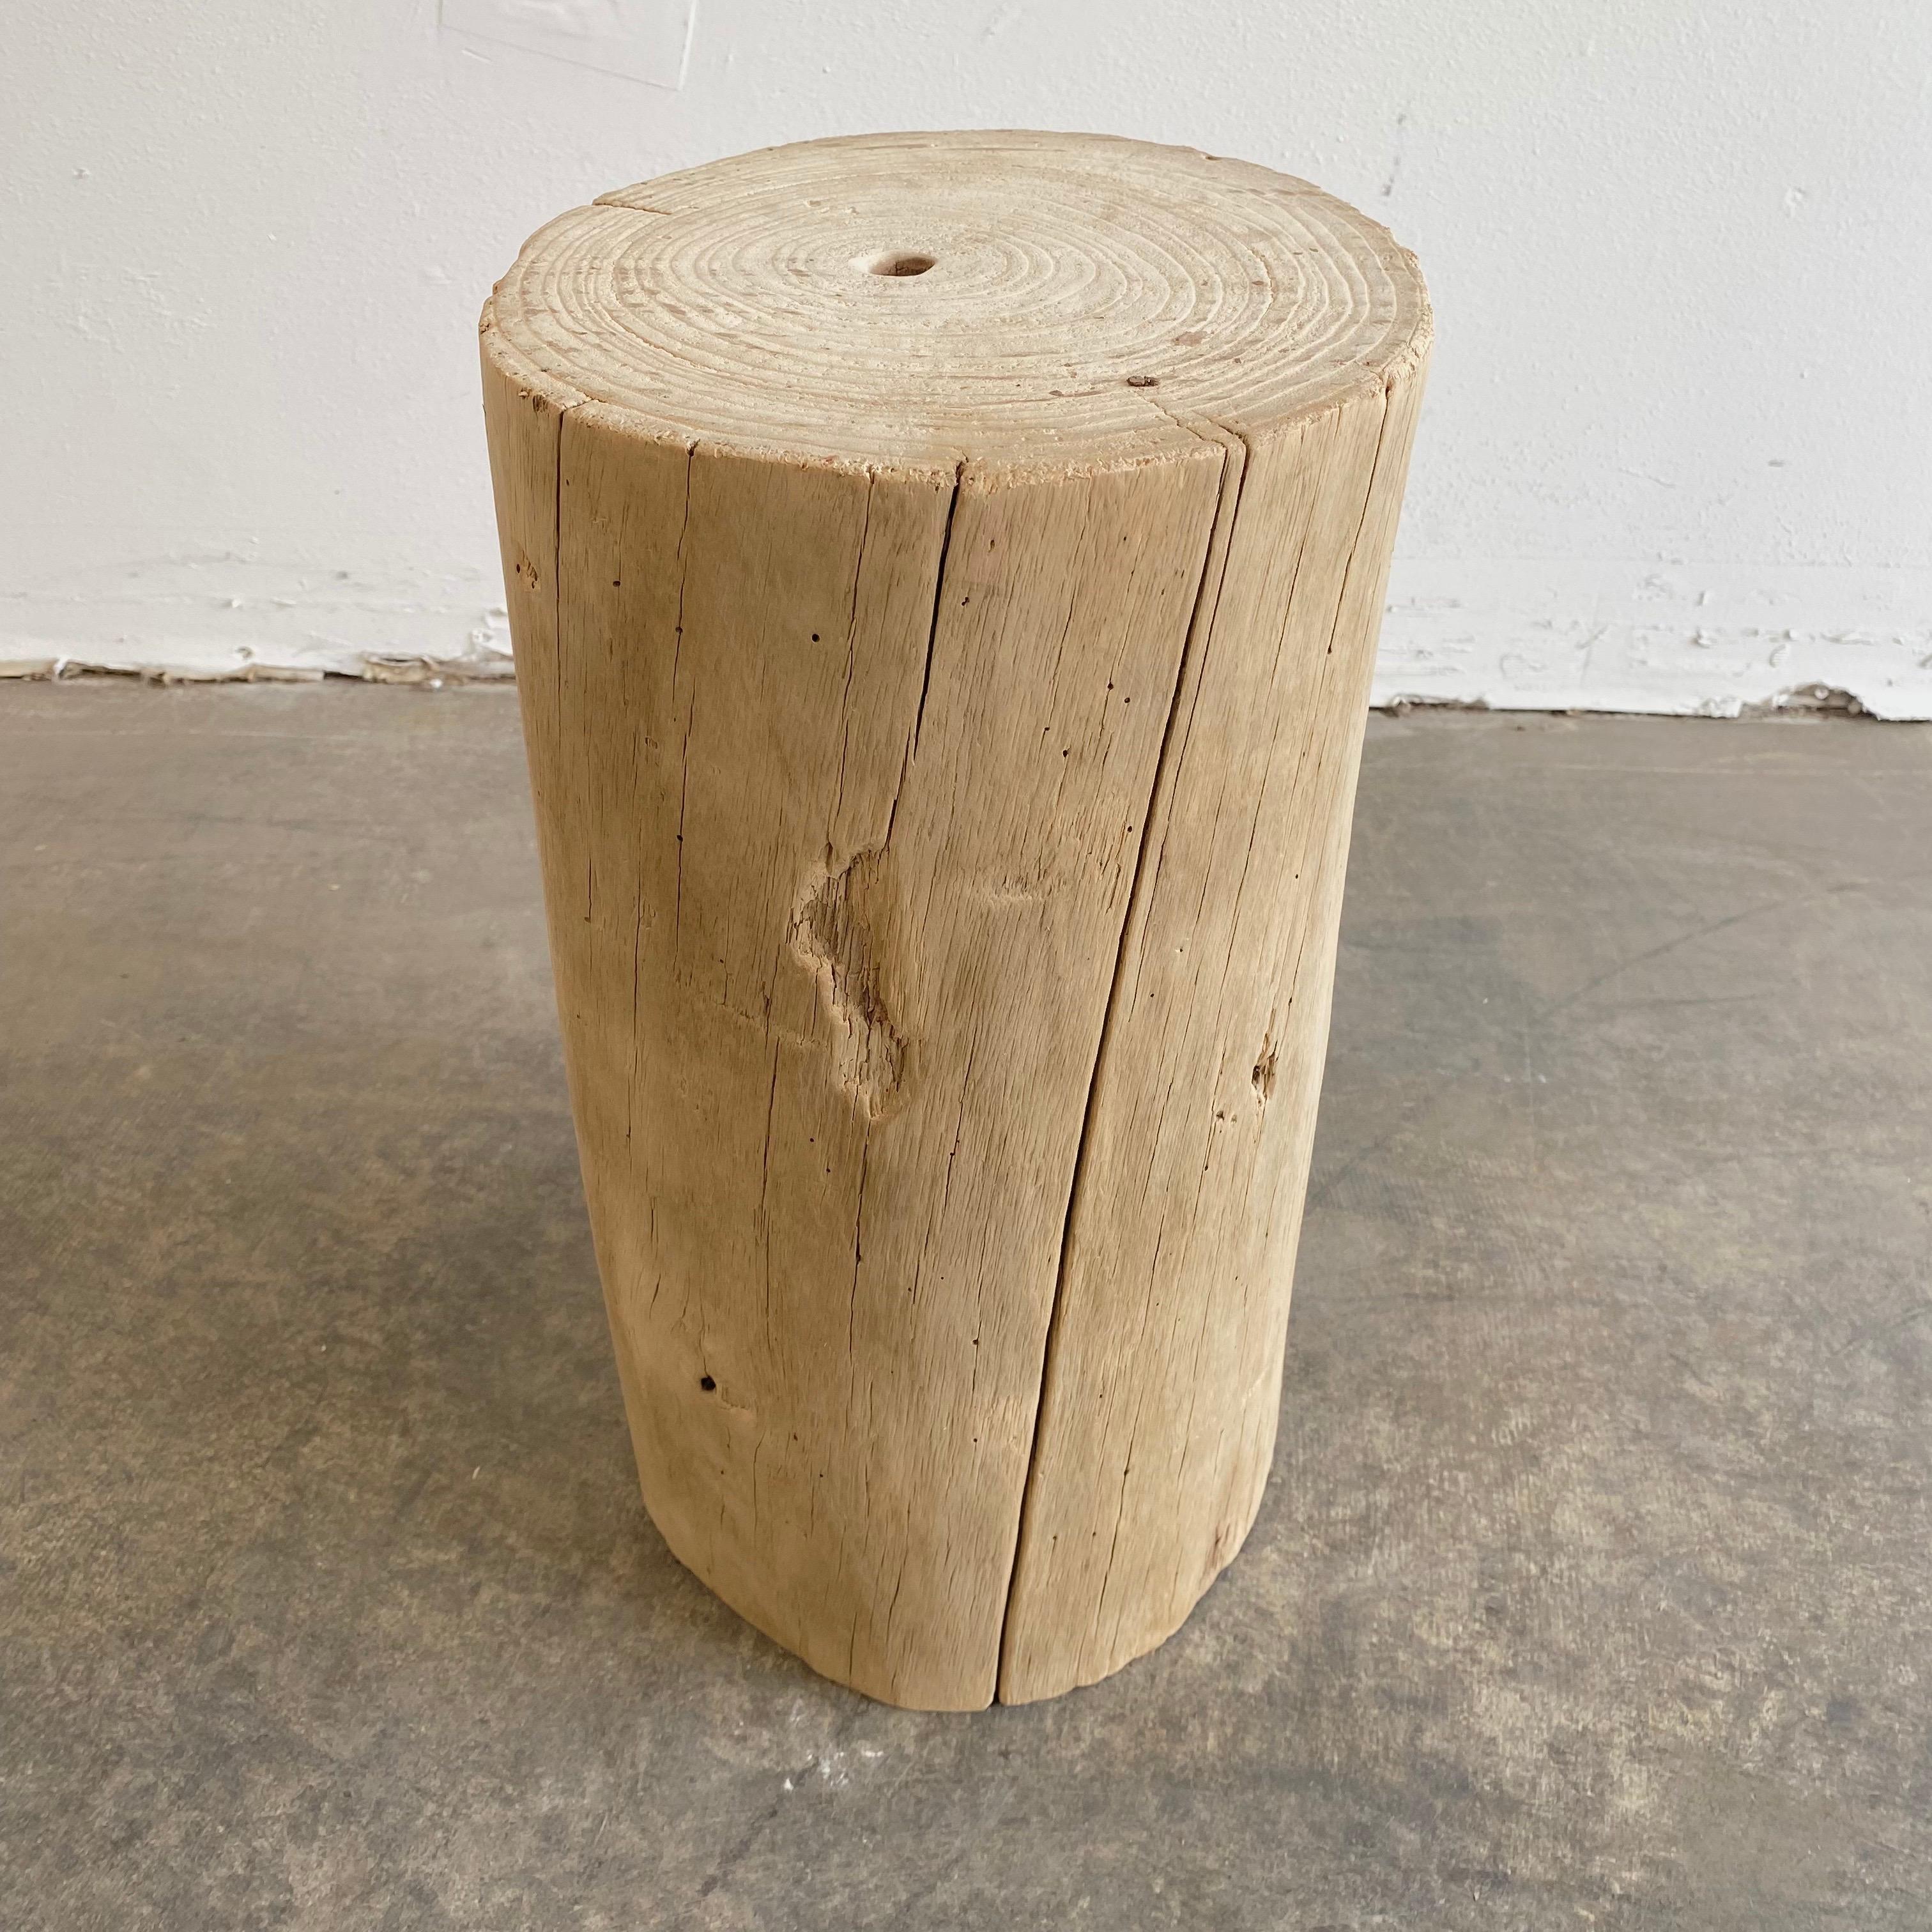 Natural wood side table stump 
Size: 12